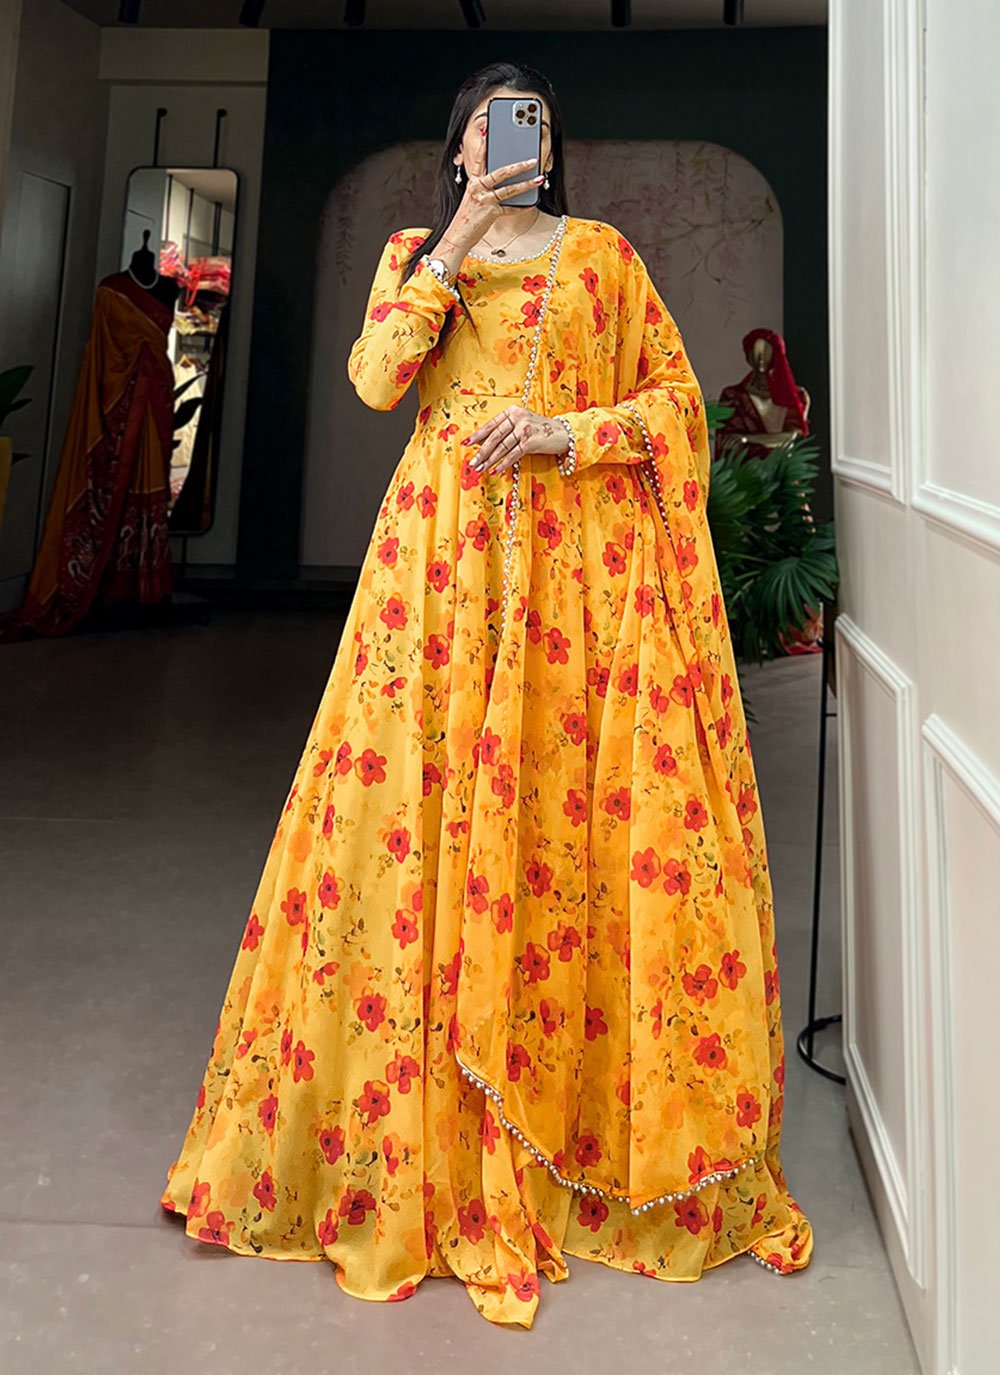 Yellow Indian Gowns - Buy Indian Gown online at